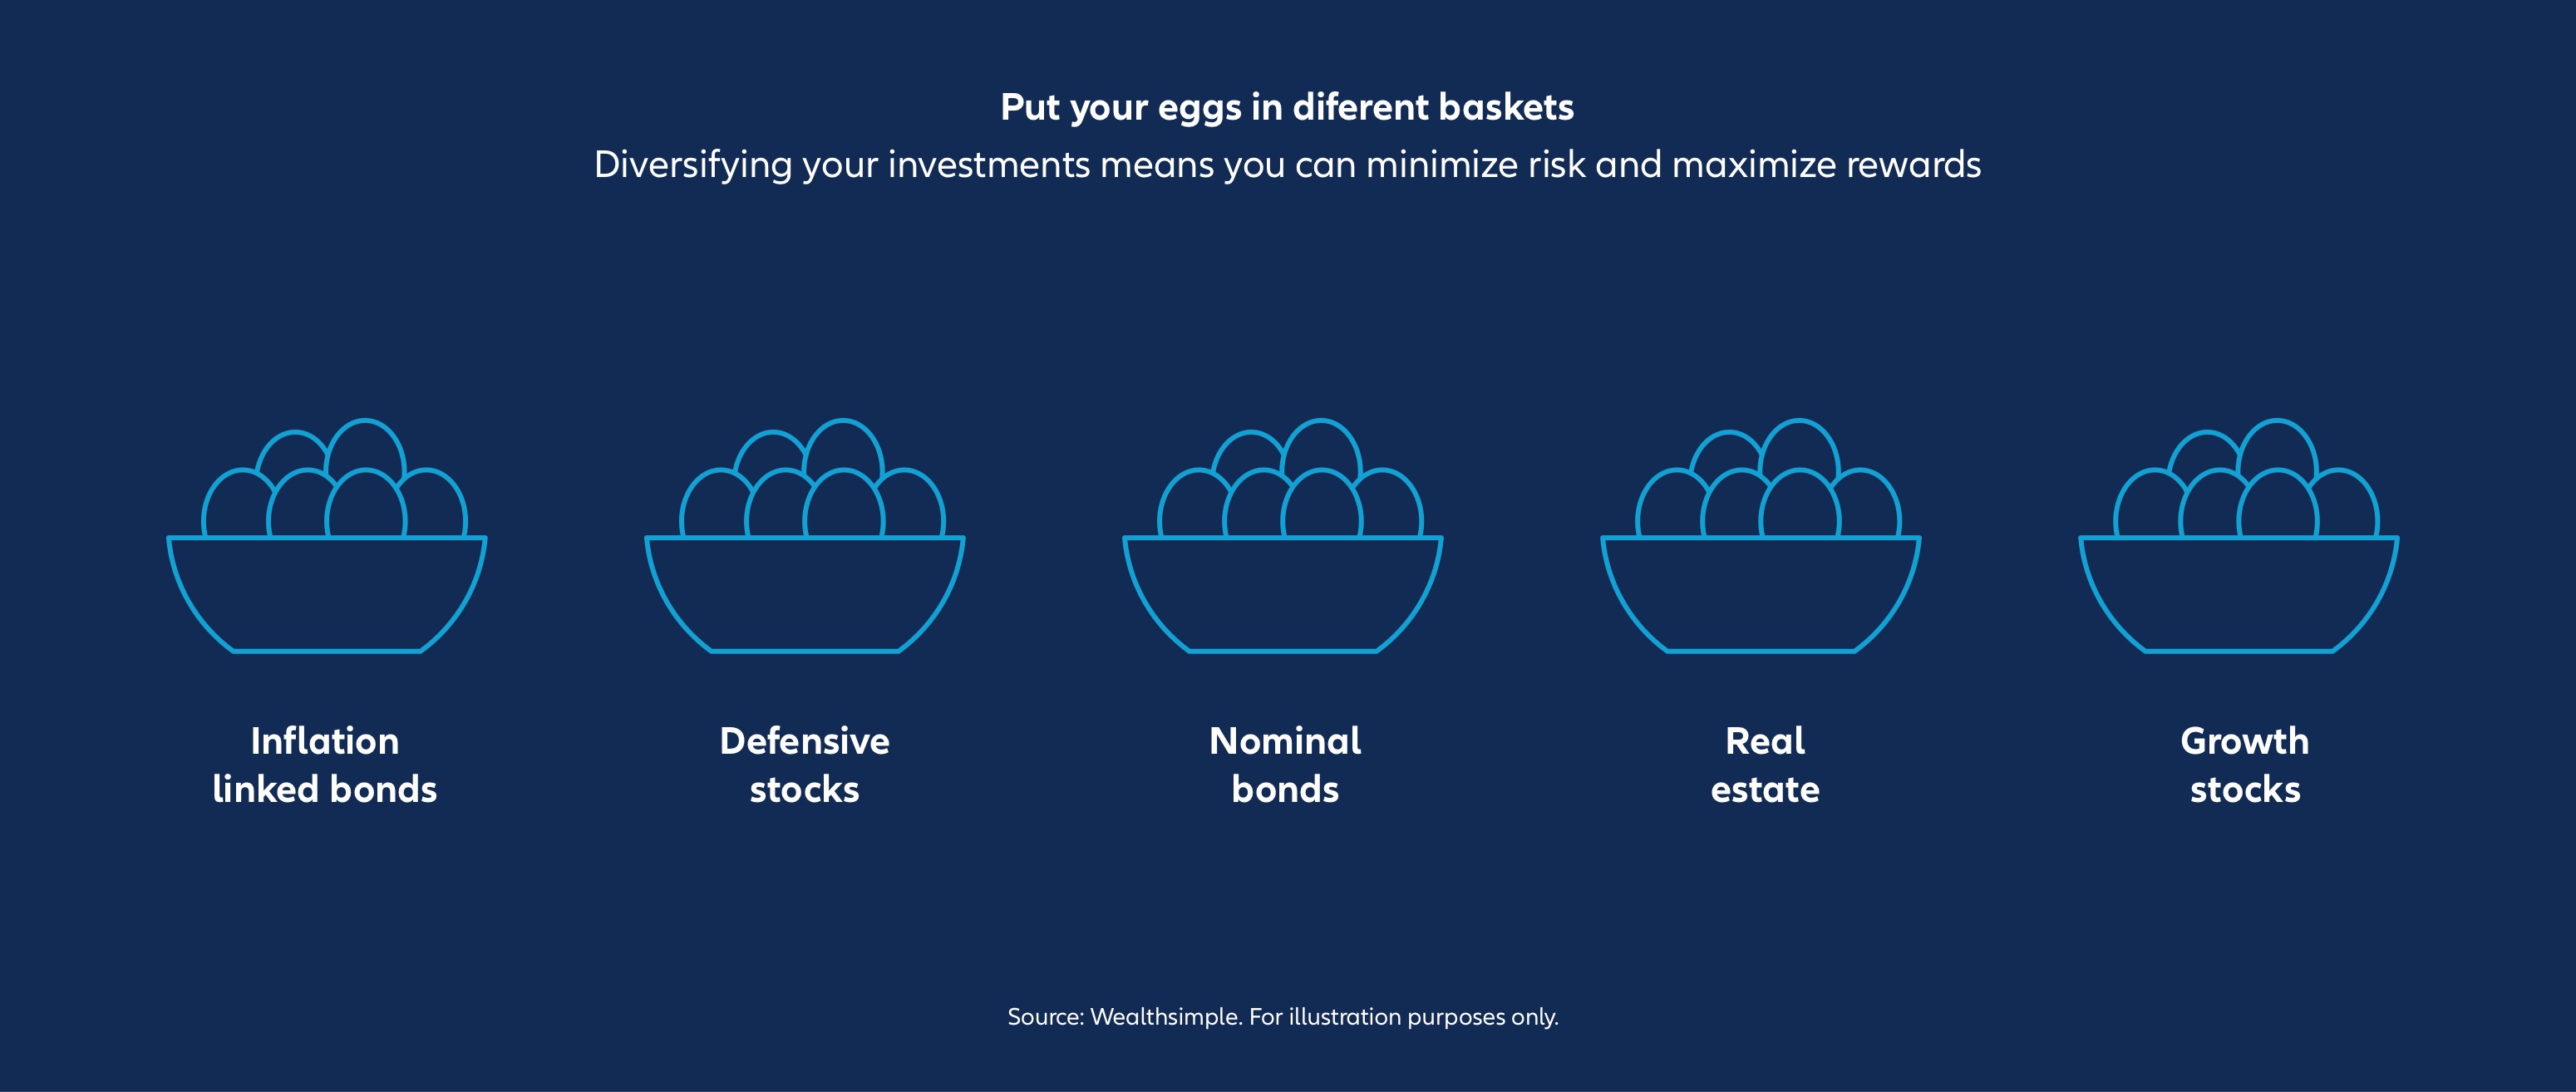 Infographic: Put your eggs in different baskets. Diversifying your investments means you can minimize risk and maximize rewards. Shown are different baskets with the same amount of eggs. From left to right: Inflation-linked bonds, Defensive stocks, Nominal bonds, Real estate, Growth stocks